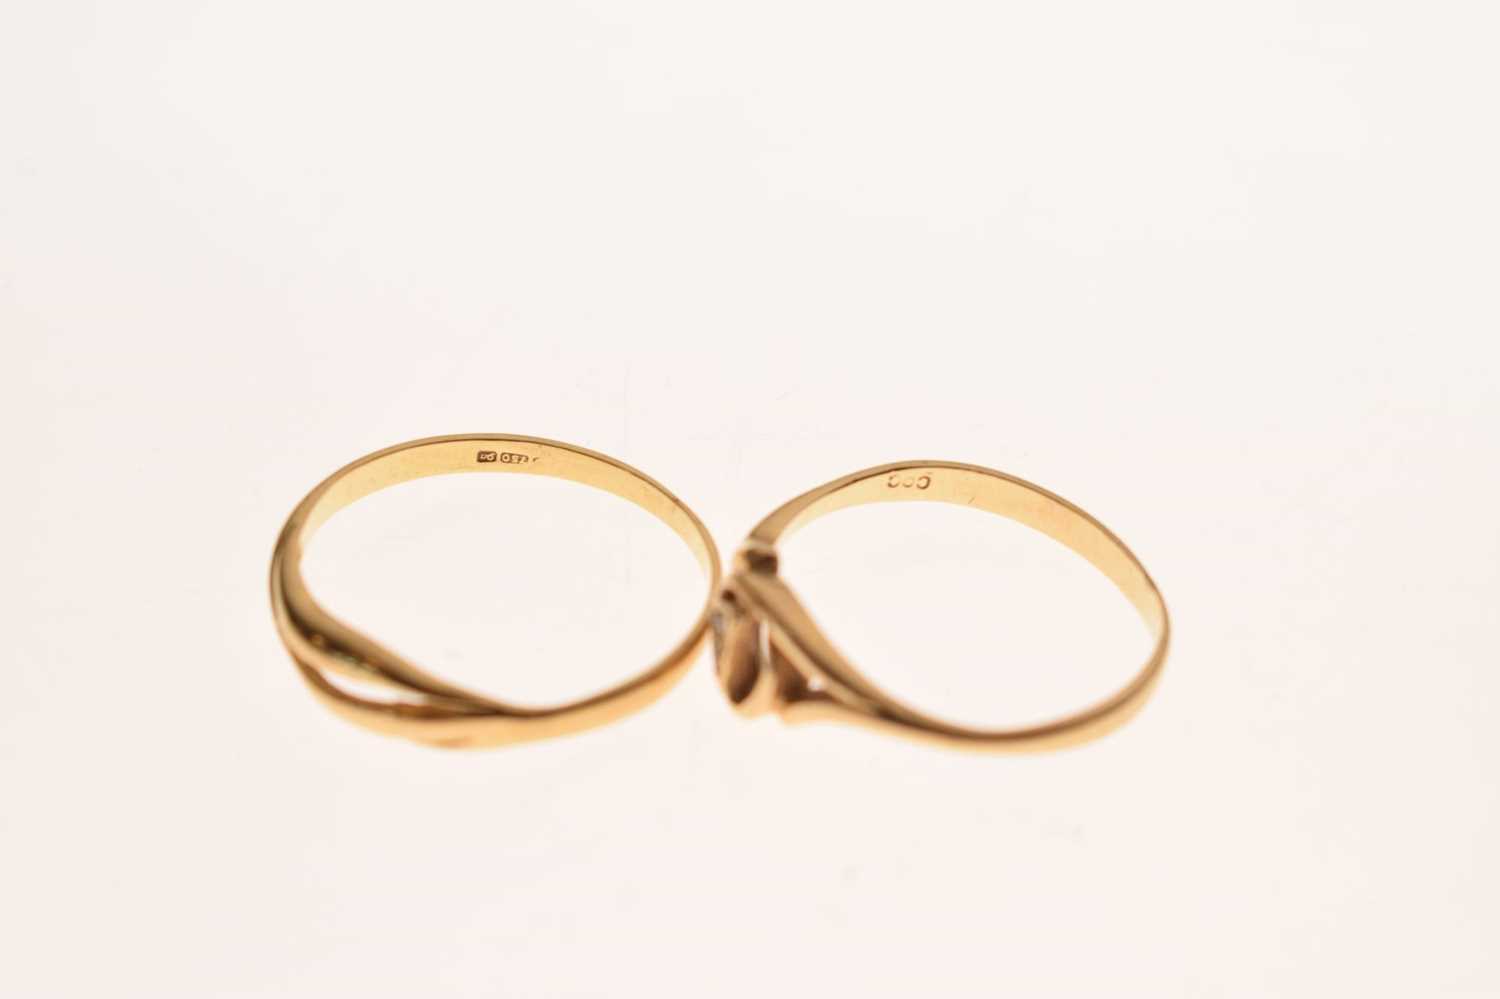 Yellow metal (750) ring and 14ct gold ring - Image 6 of 6